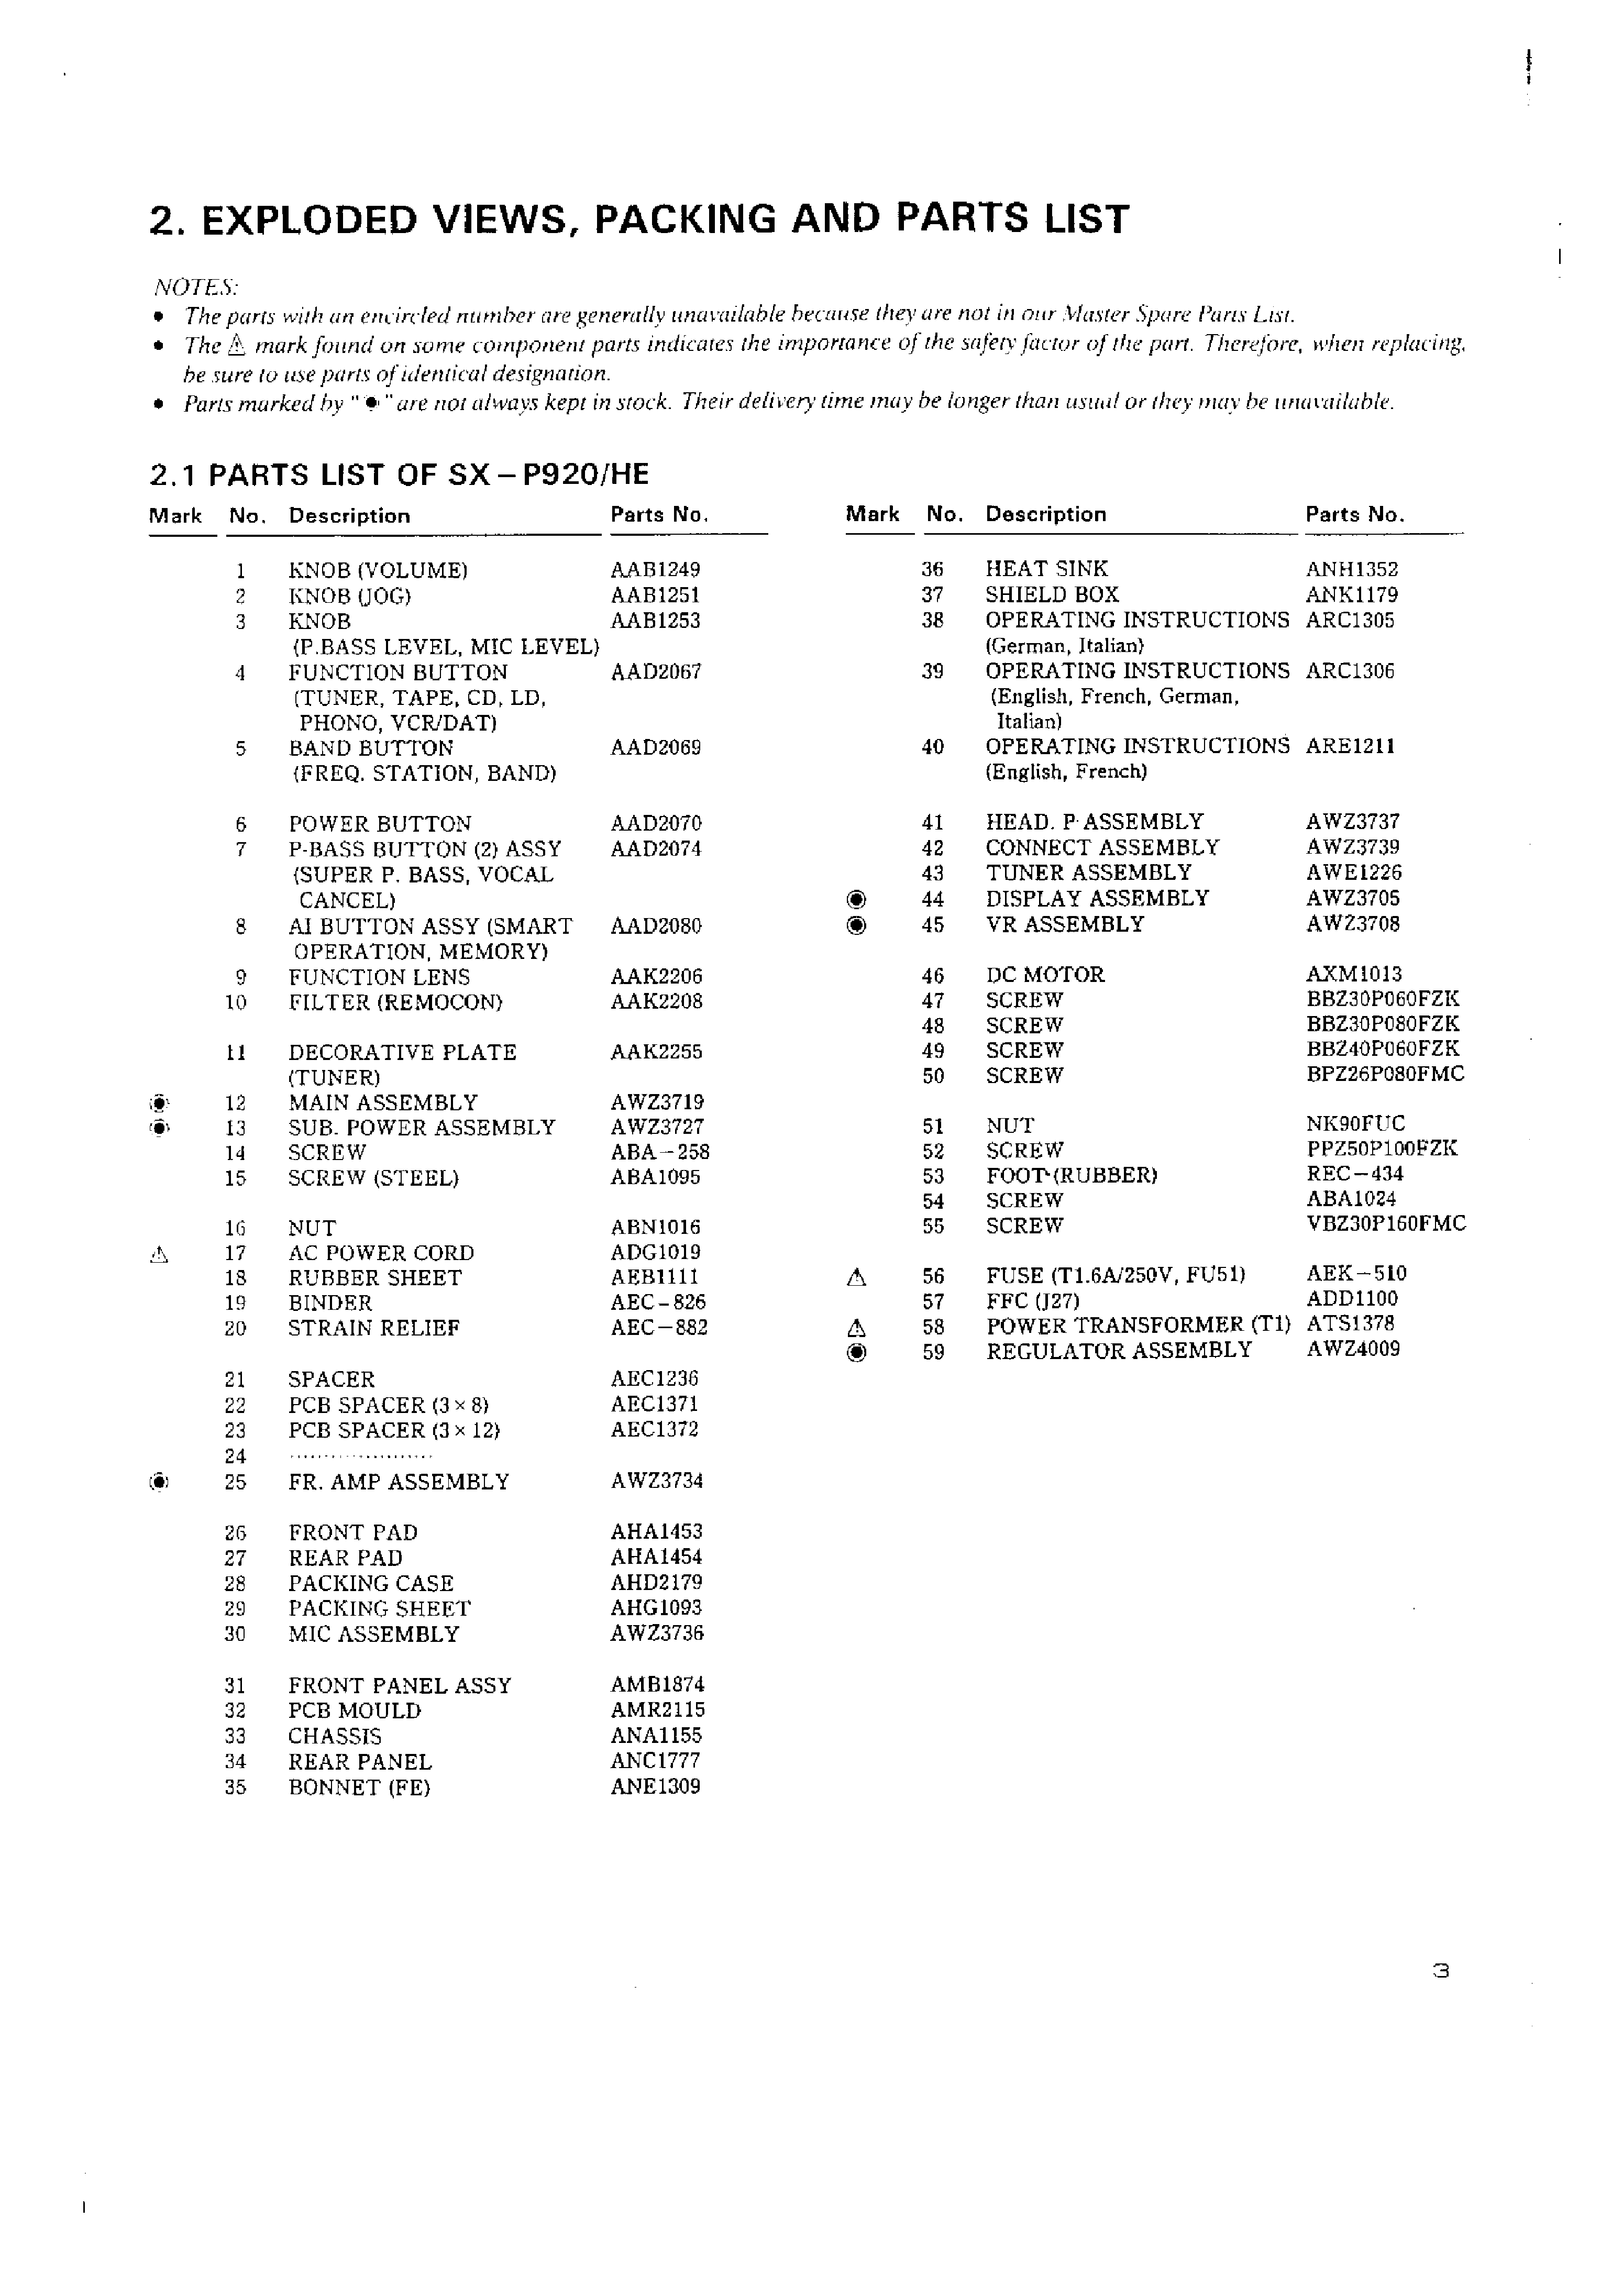 PIONEER SX-P720 920 SM service manual (2nd page)